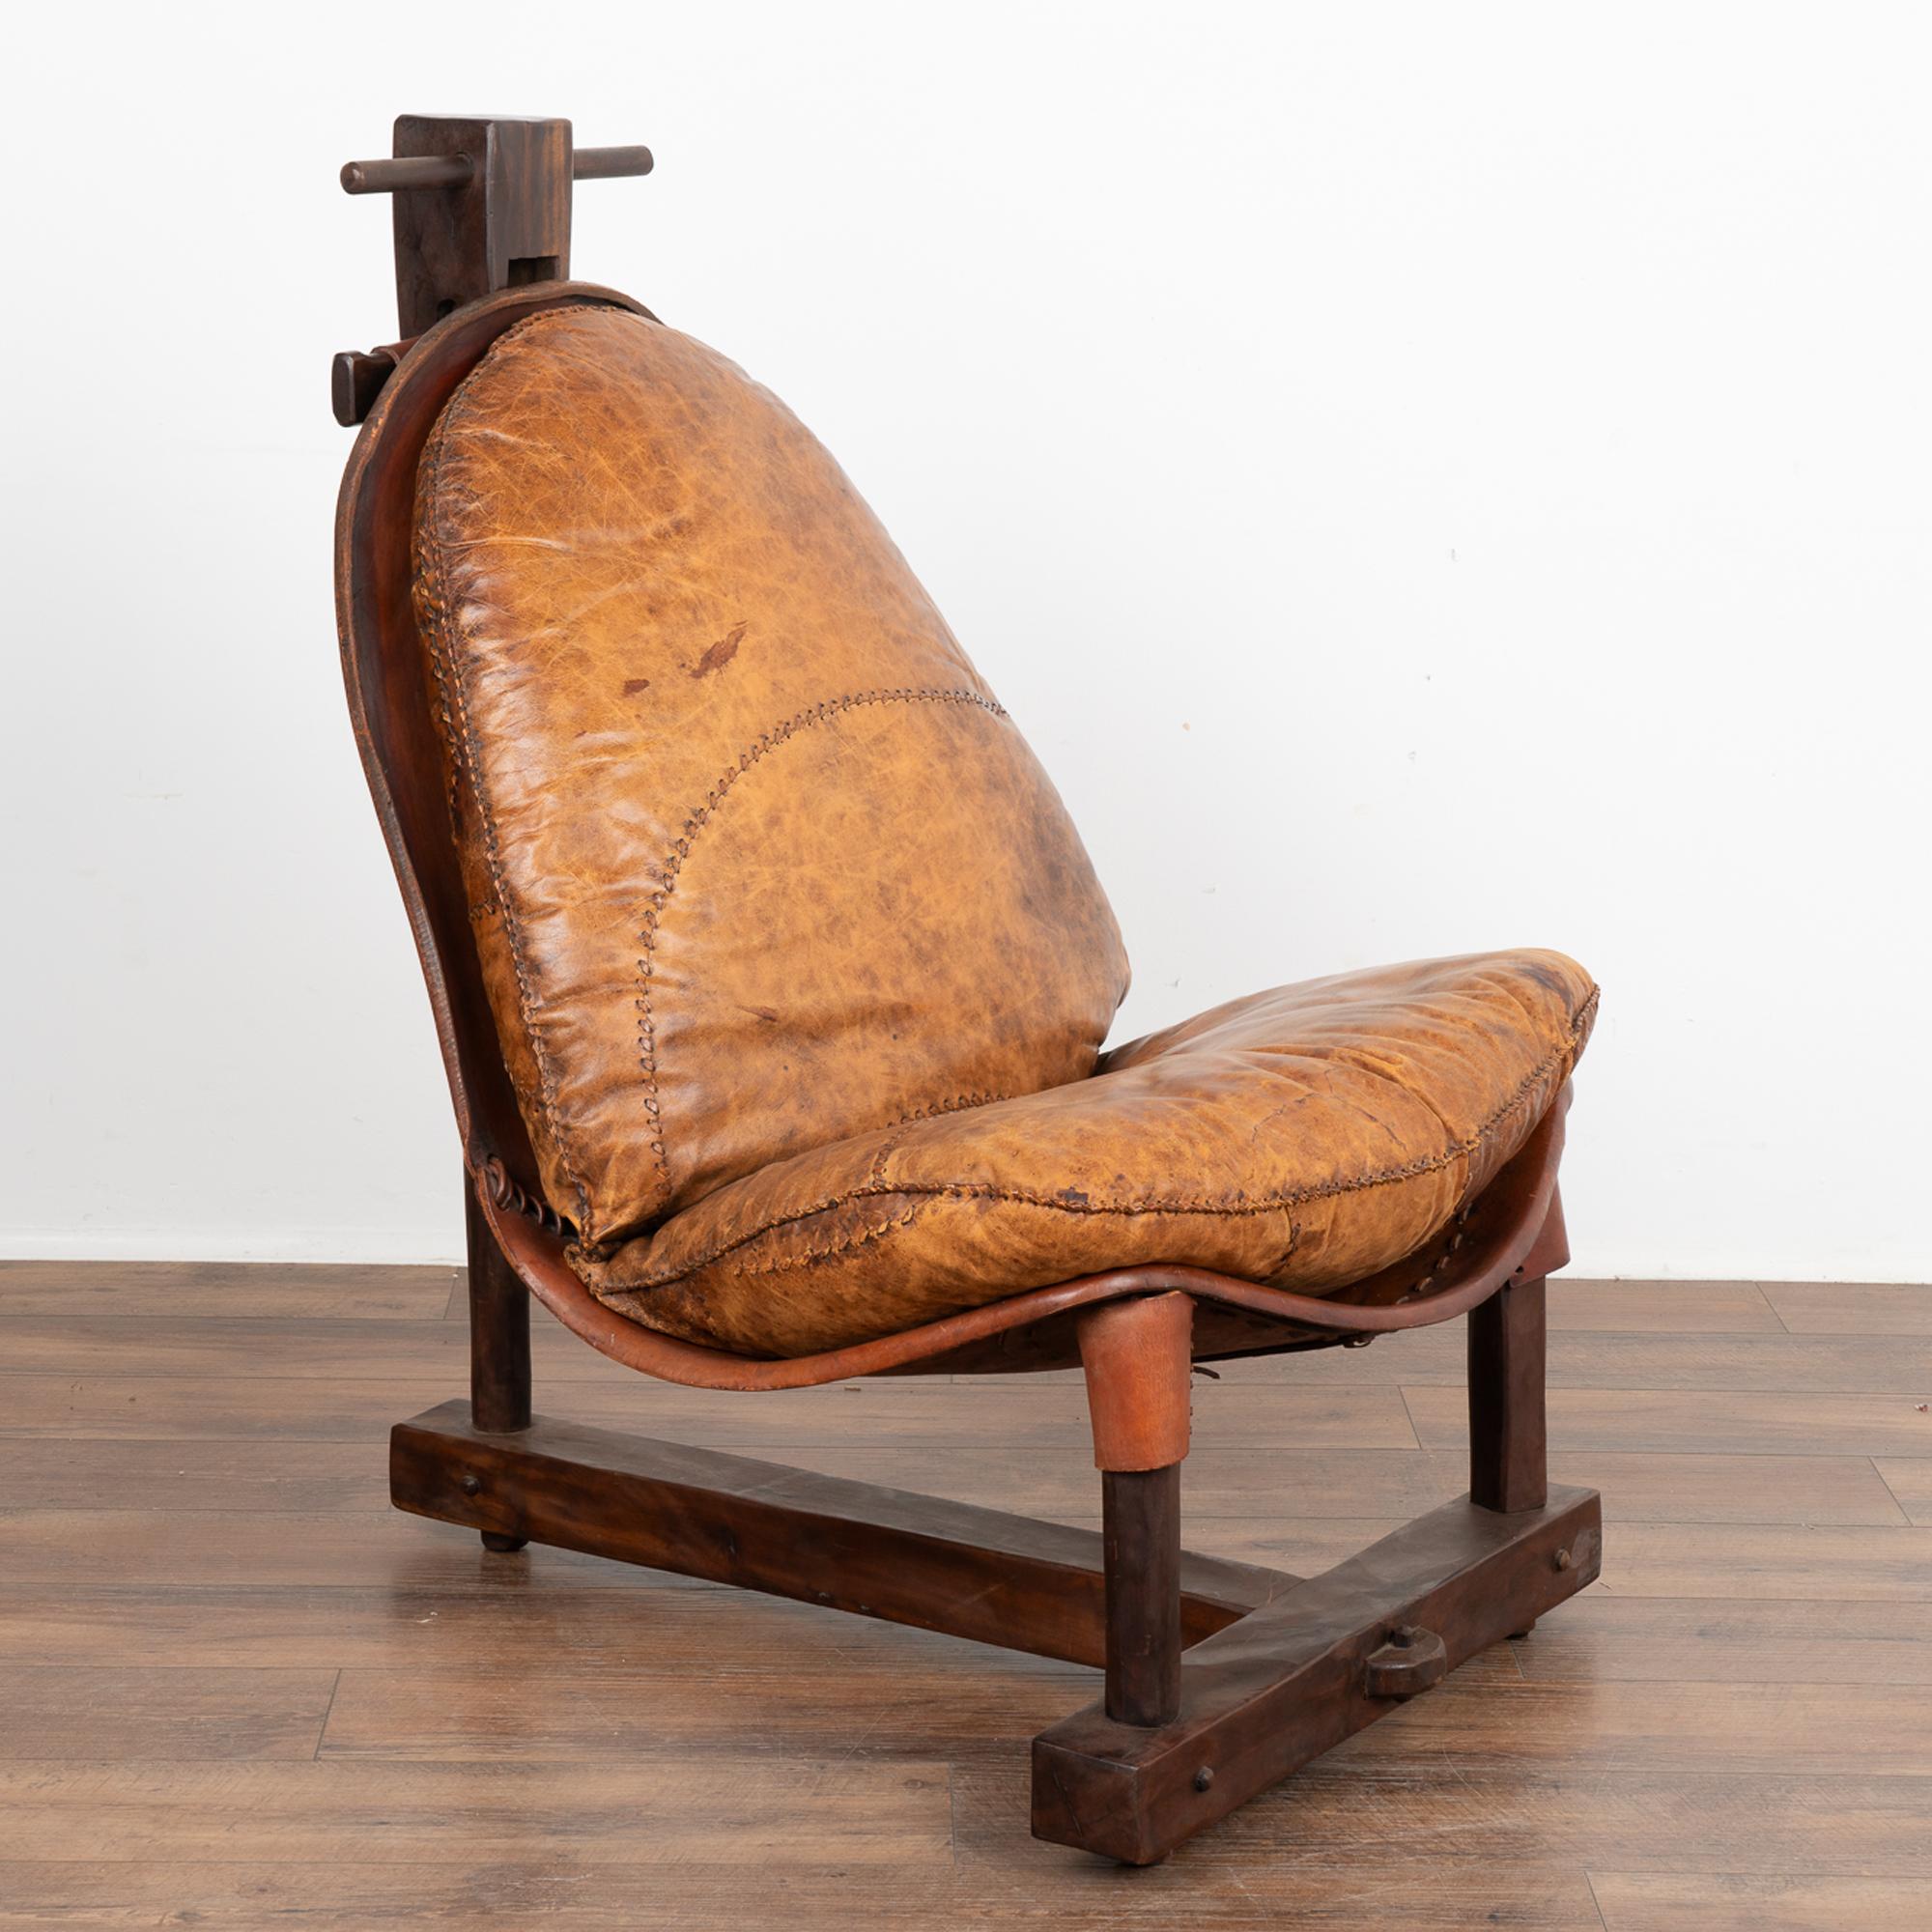 Mid-Century brutalist armchair in stitched vintage leather, designed in Brazil in the 1960's.
The patchwork leather cushion on top with decorative stitching is reminiscent of an old baseball glove and rests in a strong wood frame.
The vintage